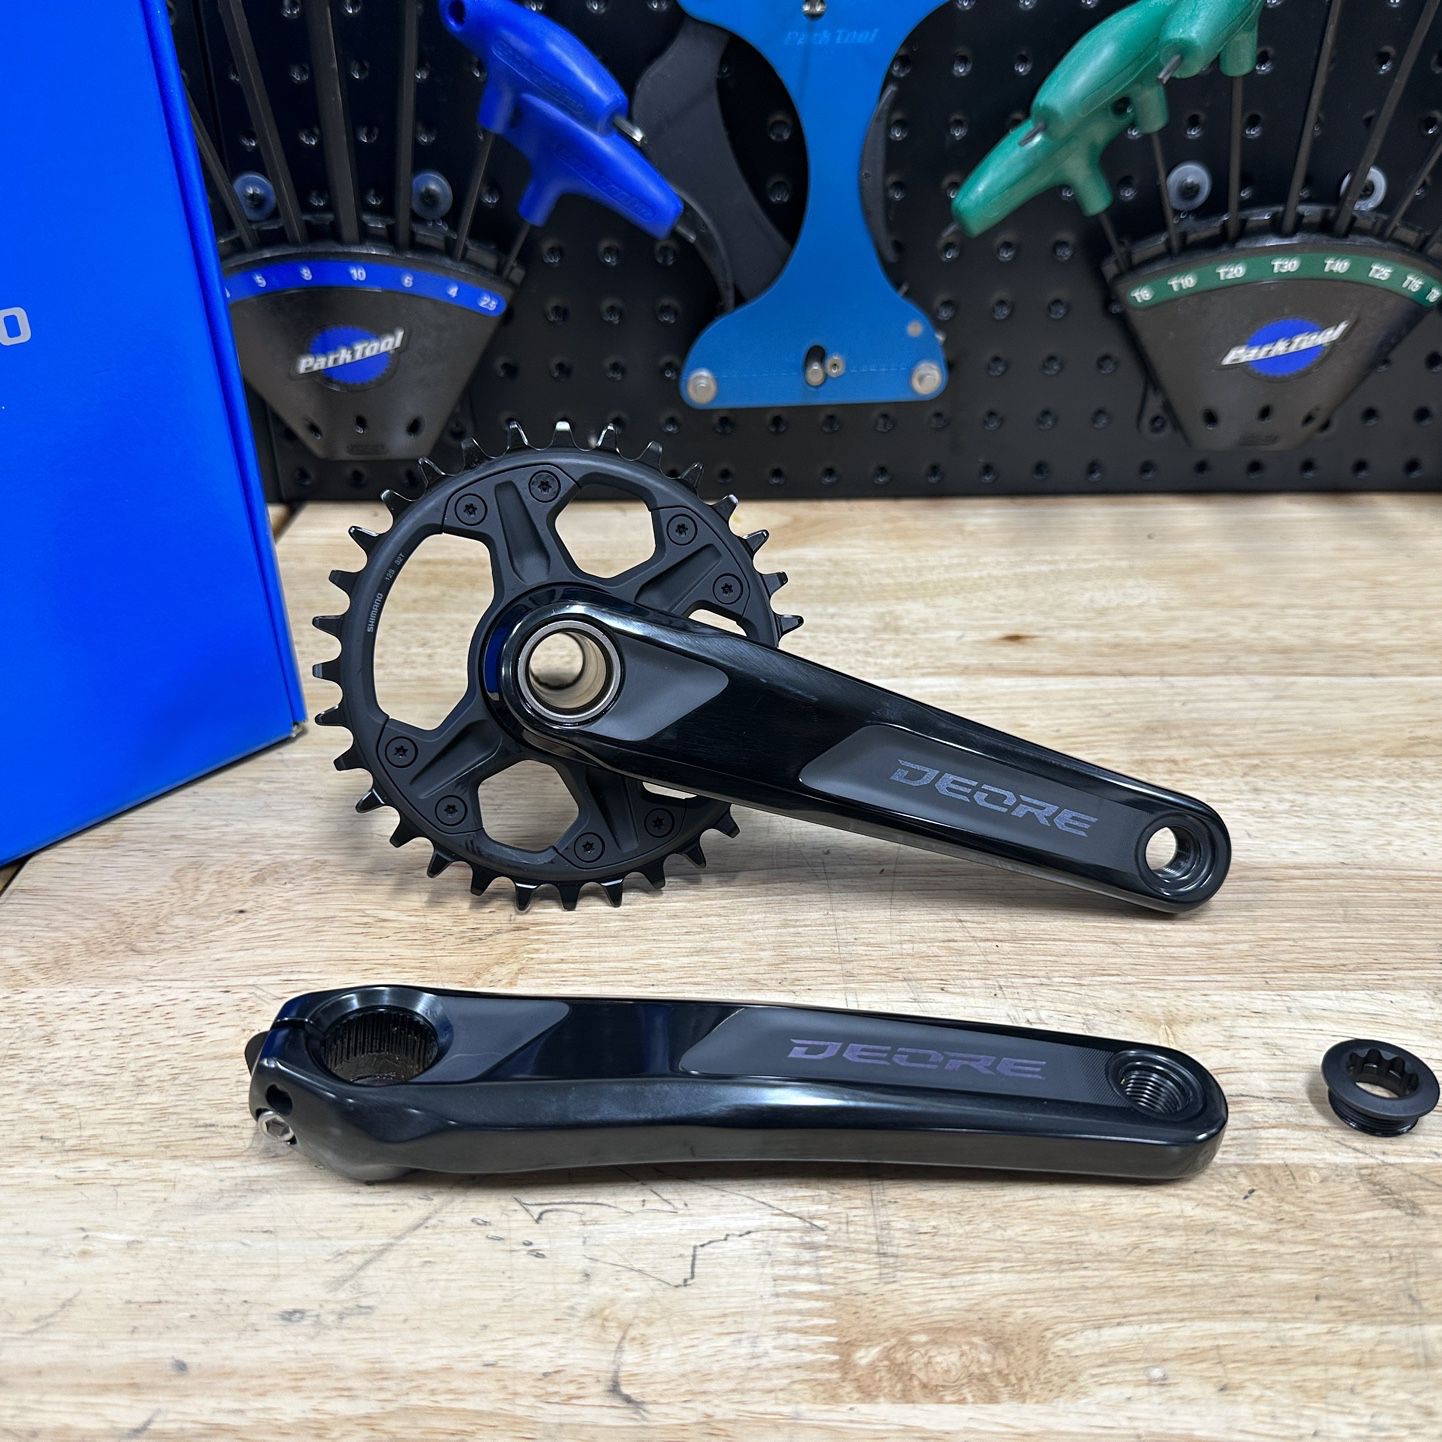 Brand New Shimano Deore Crankset for BMX and MTB.